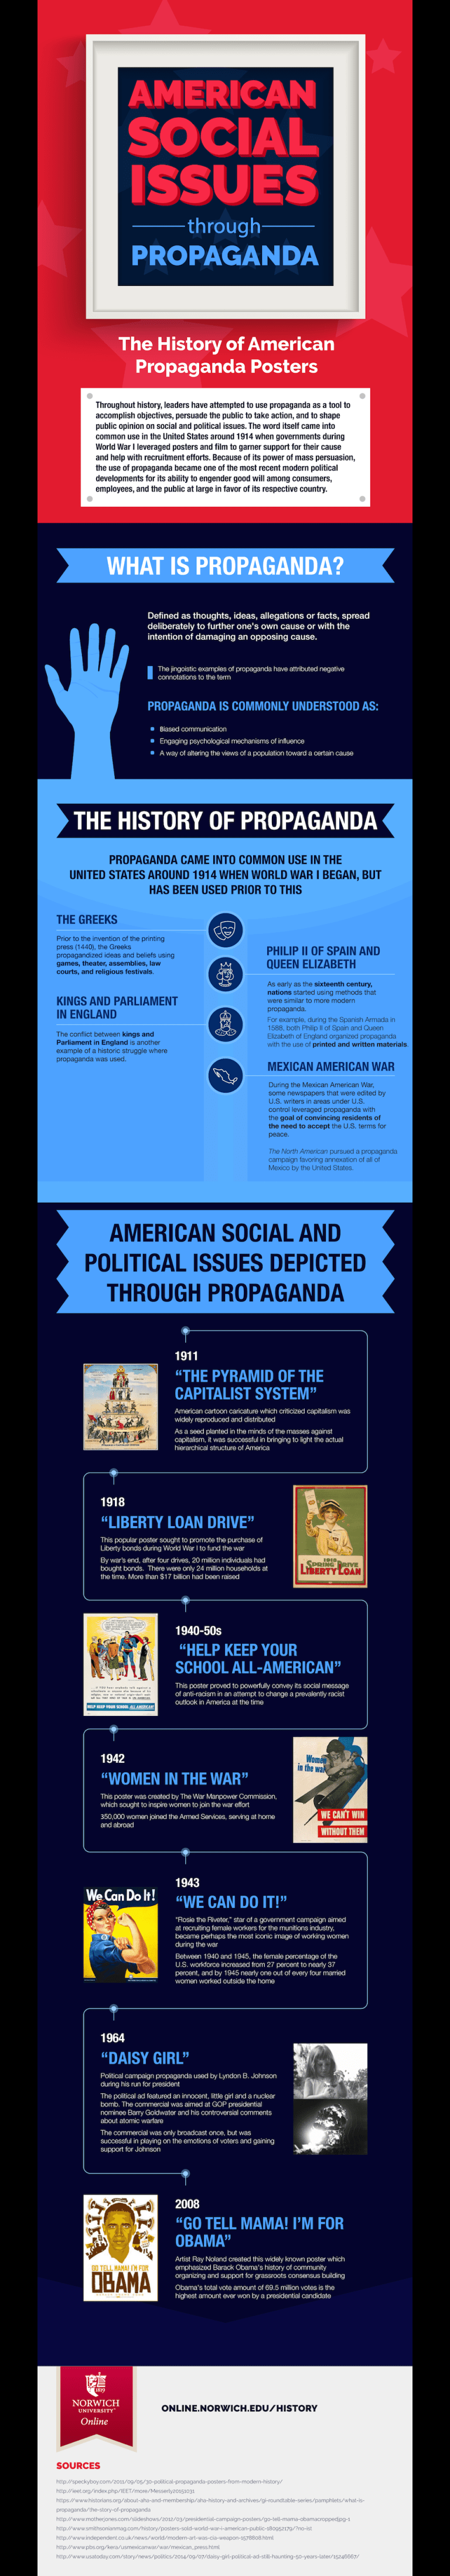 infographic - history of american propaganda posters